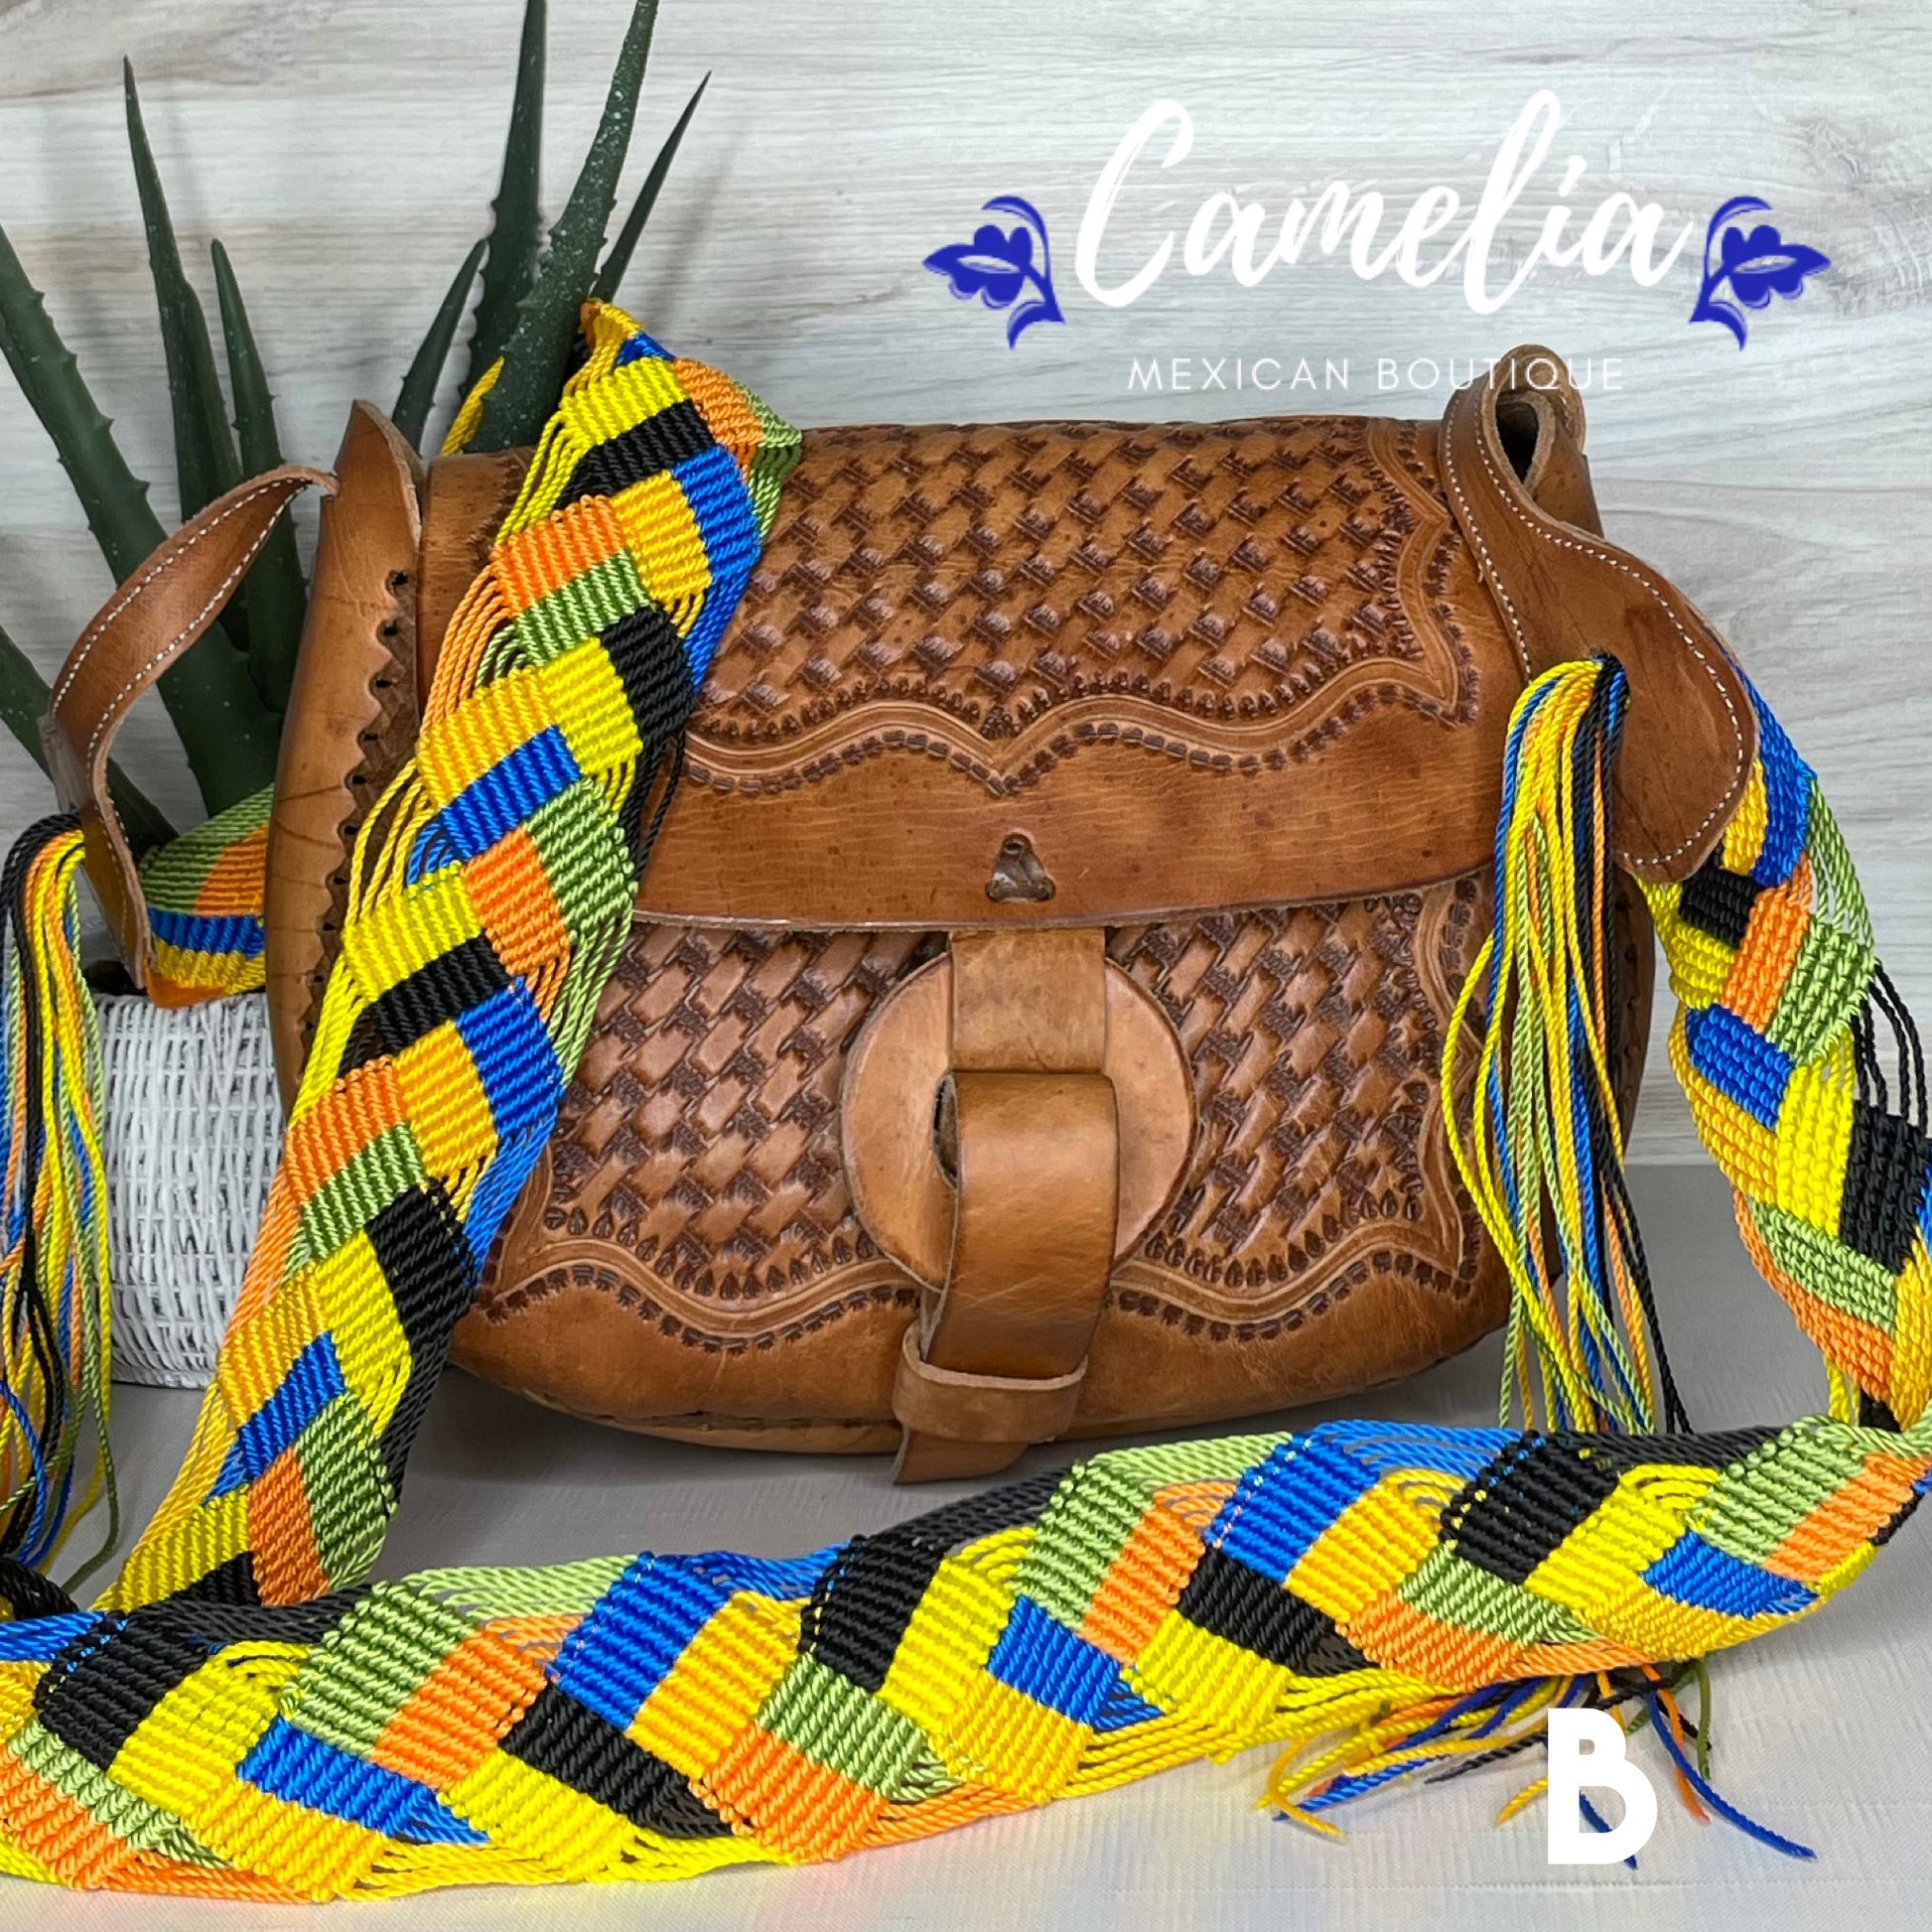 Mexican Leather Envelope Crossbody Bag - Hand Tooled C